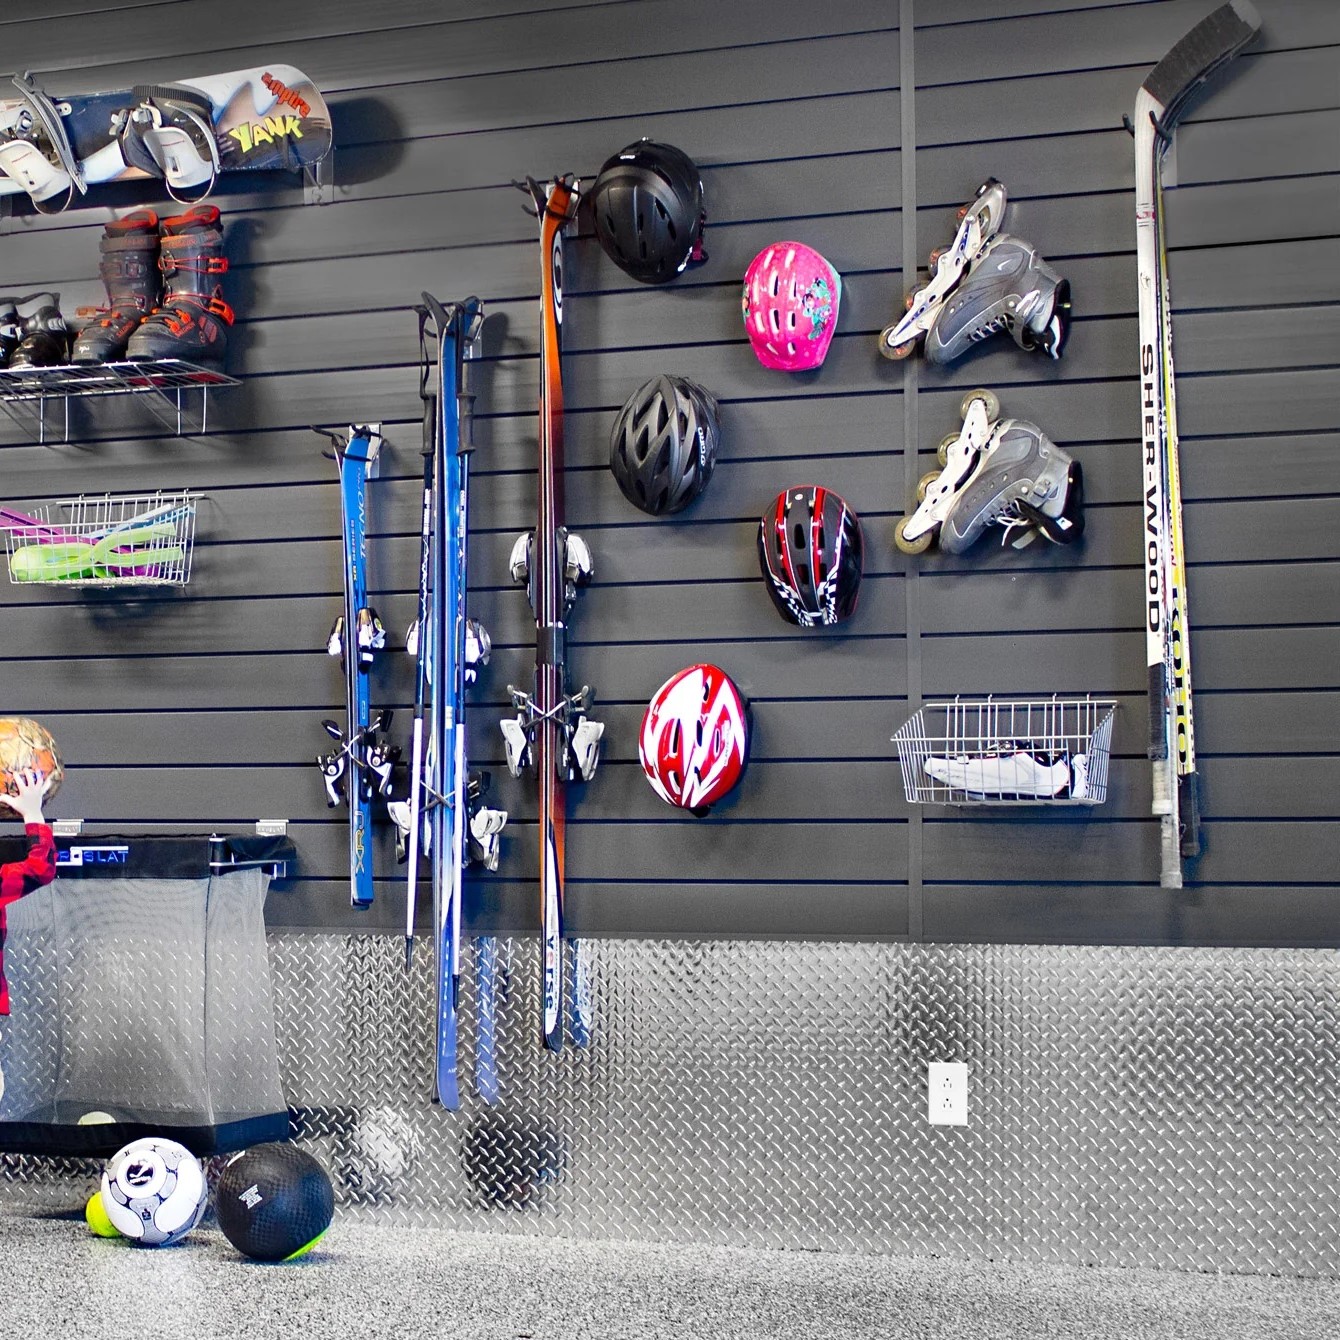 Hang A Pegboard With Movable Hooks To Organize Kids’ Sports Gear